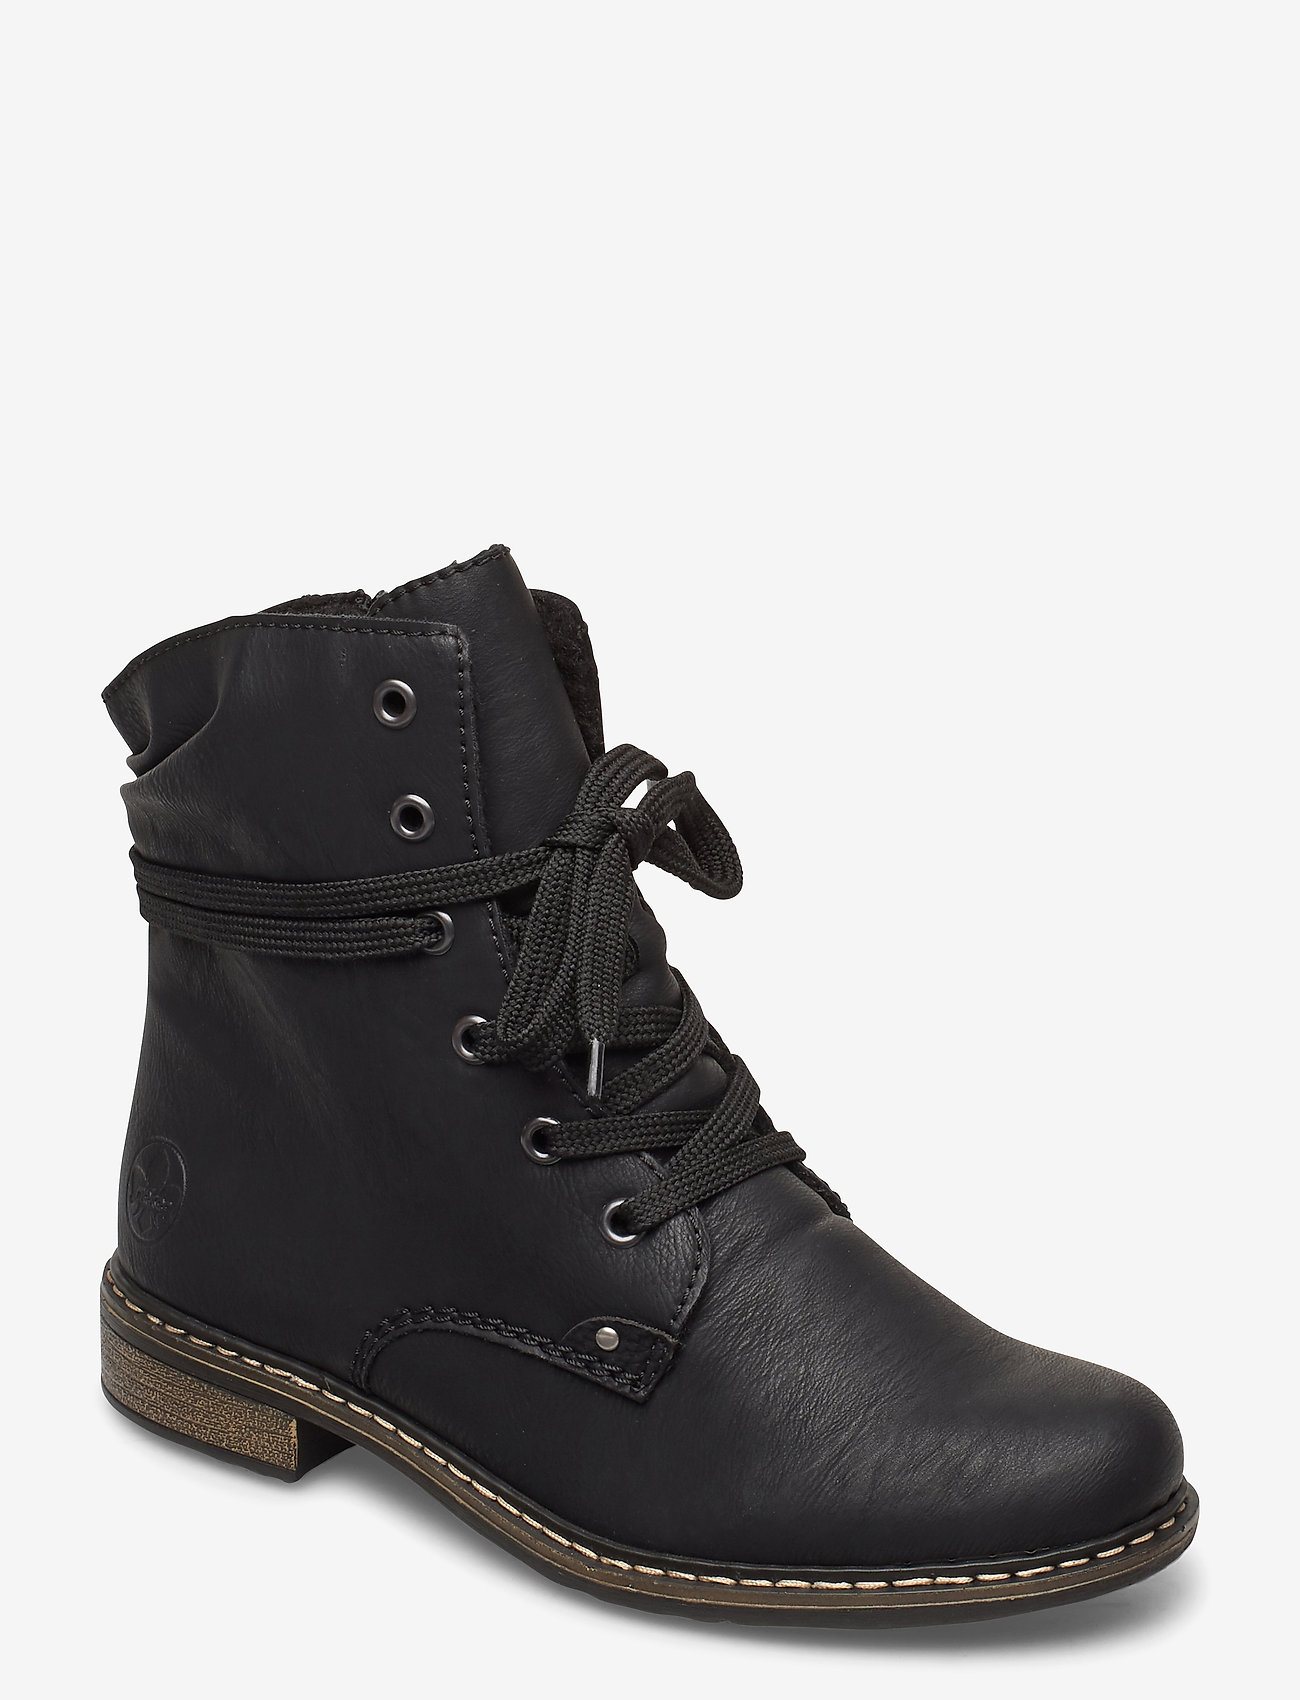 Rieker - 71229-02 - laced boots - black - 0